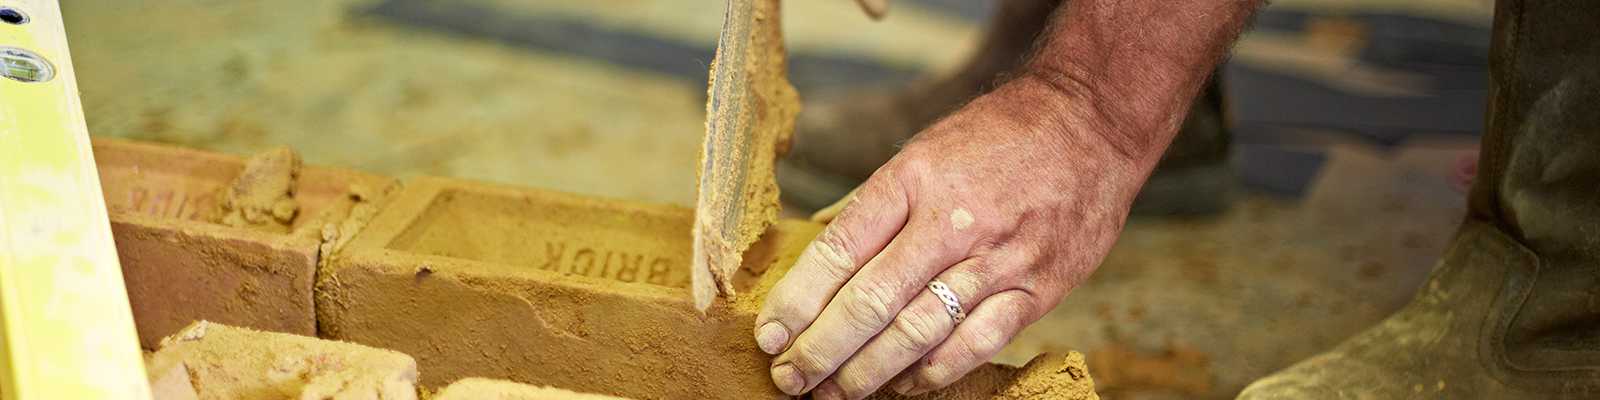 Work Based Assessments for Bricklaying NVQ Level 2